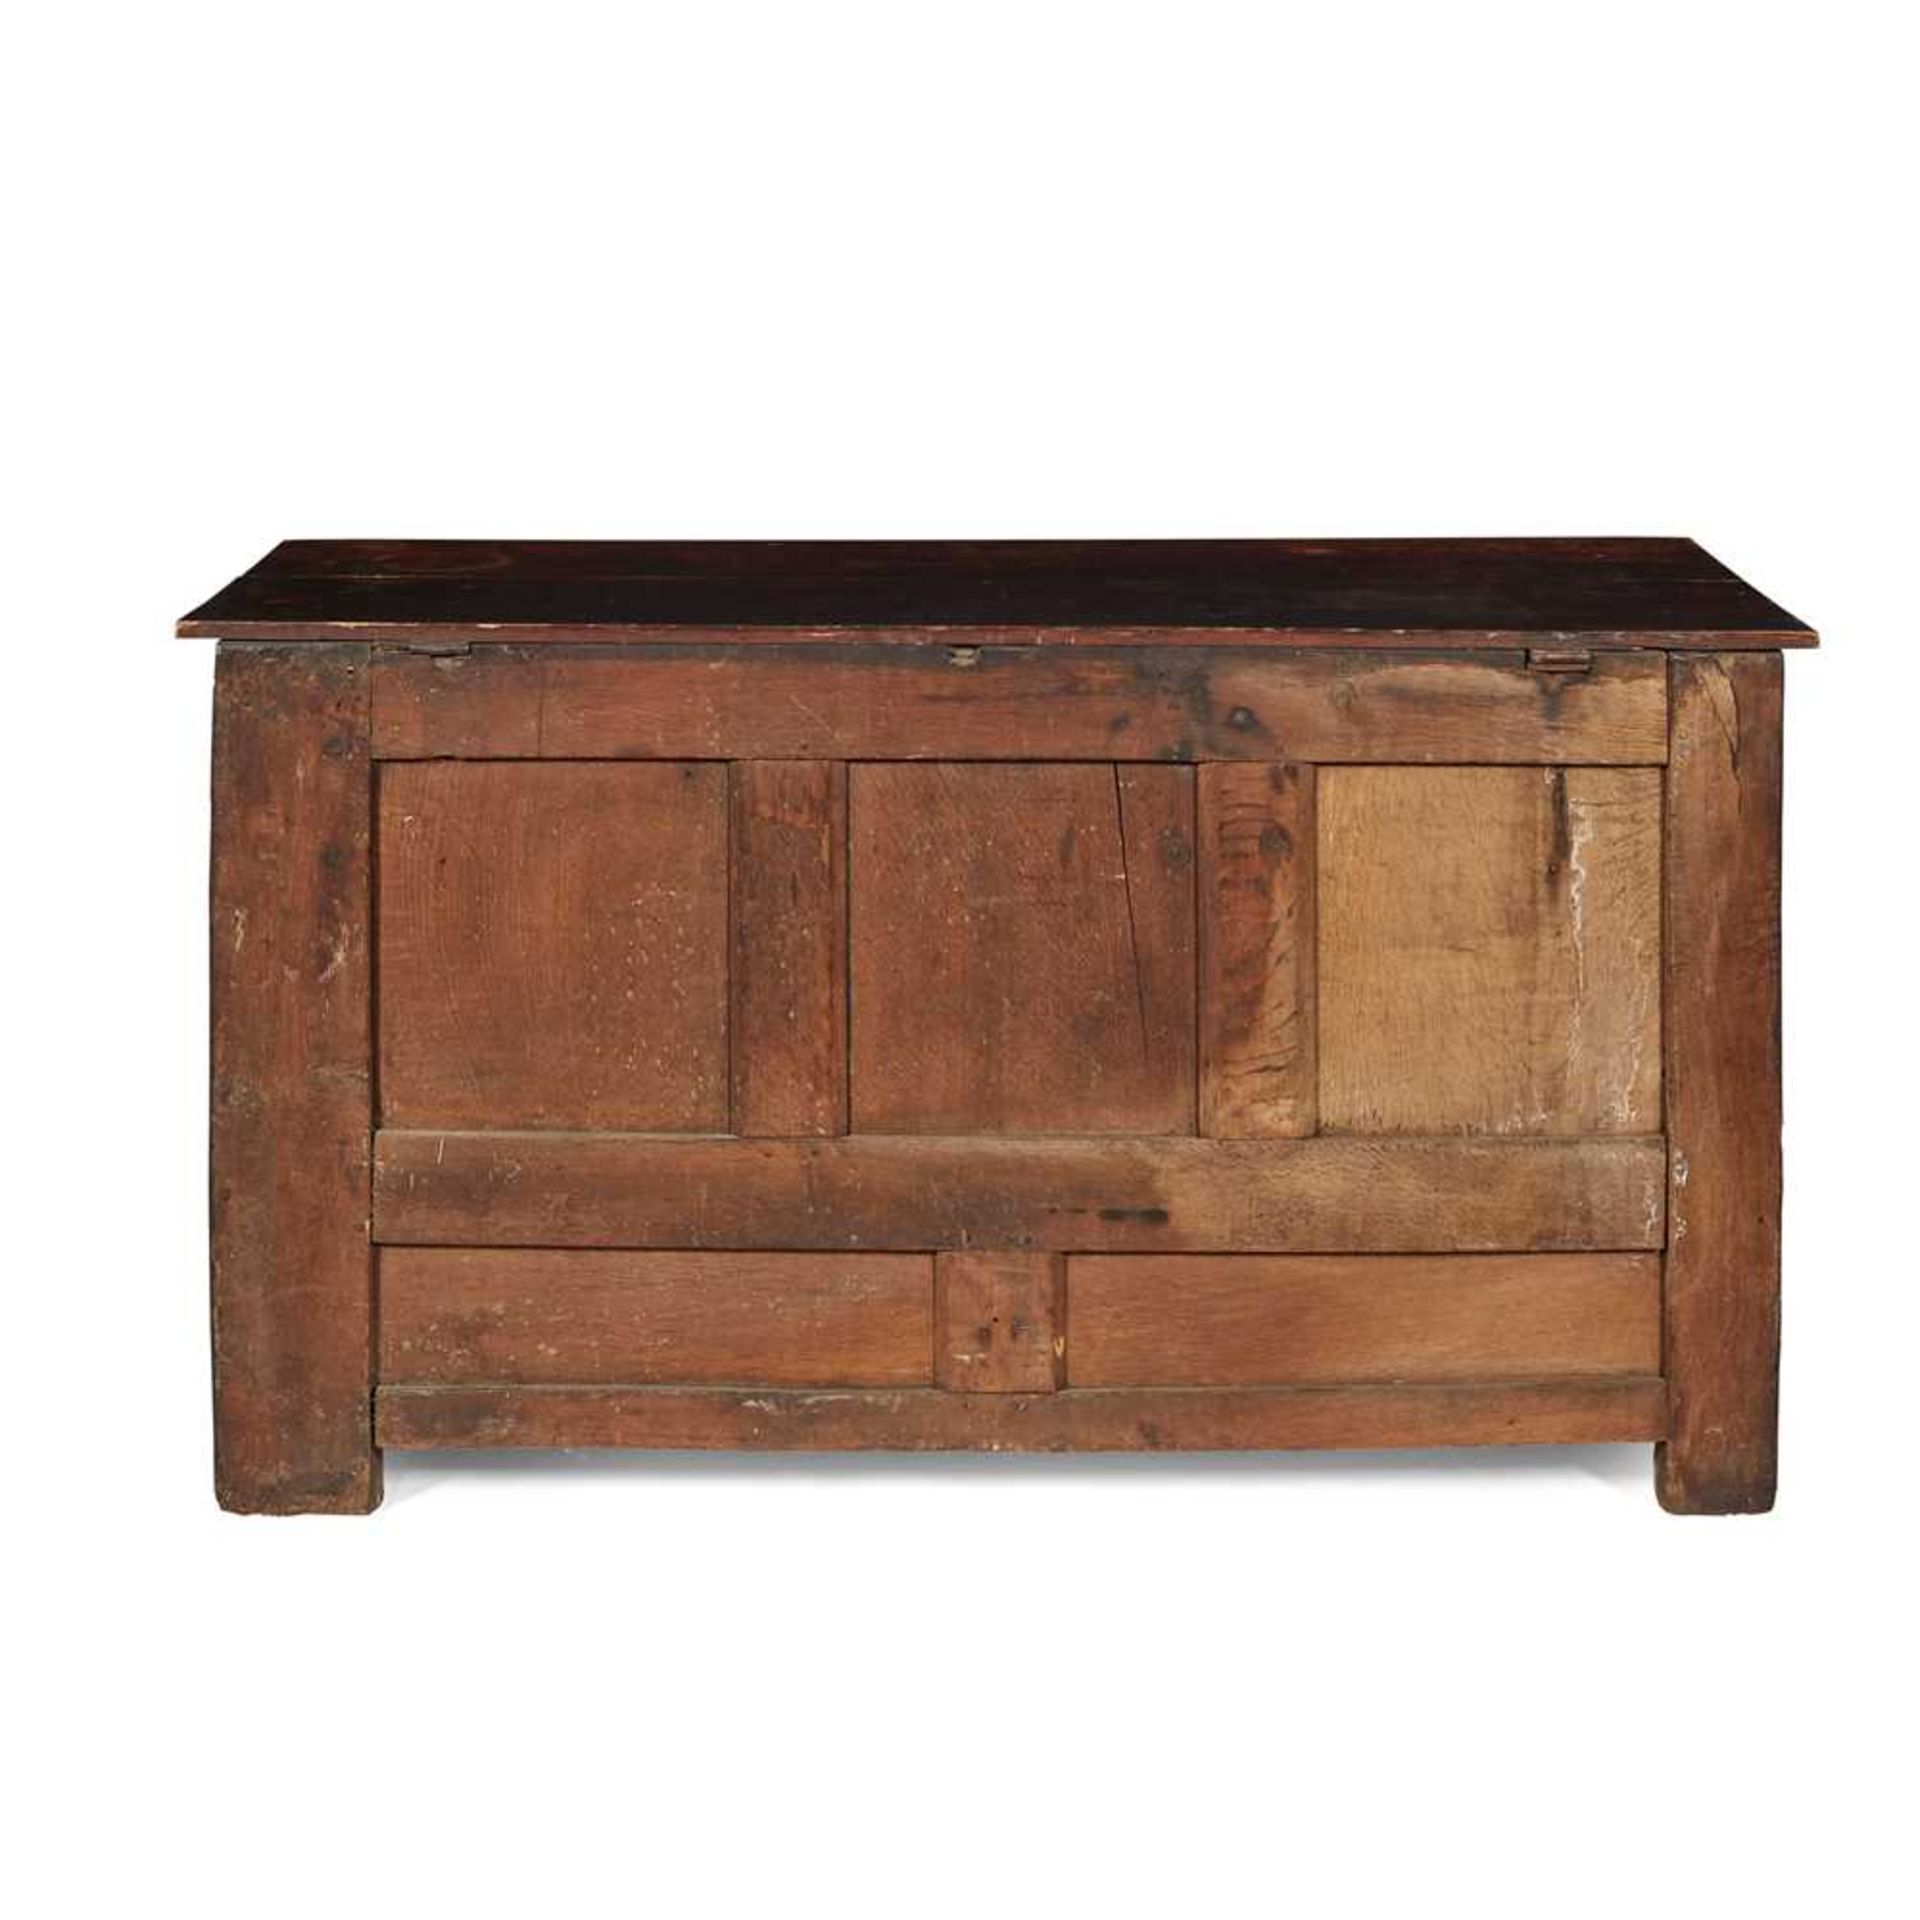 CARVED OAK AND MARQUETRY MULE CHEST 17TH CENTURY - Image 2 of 24